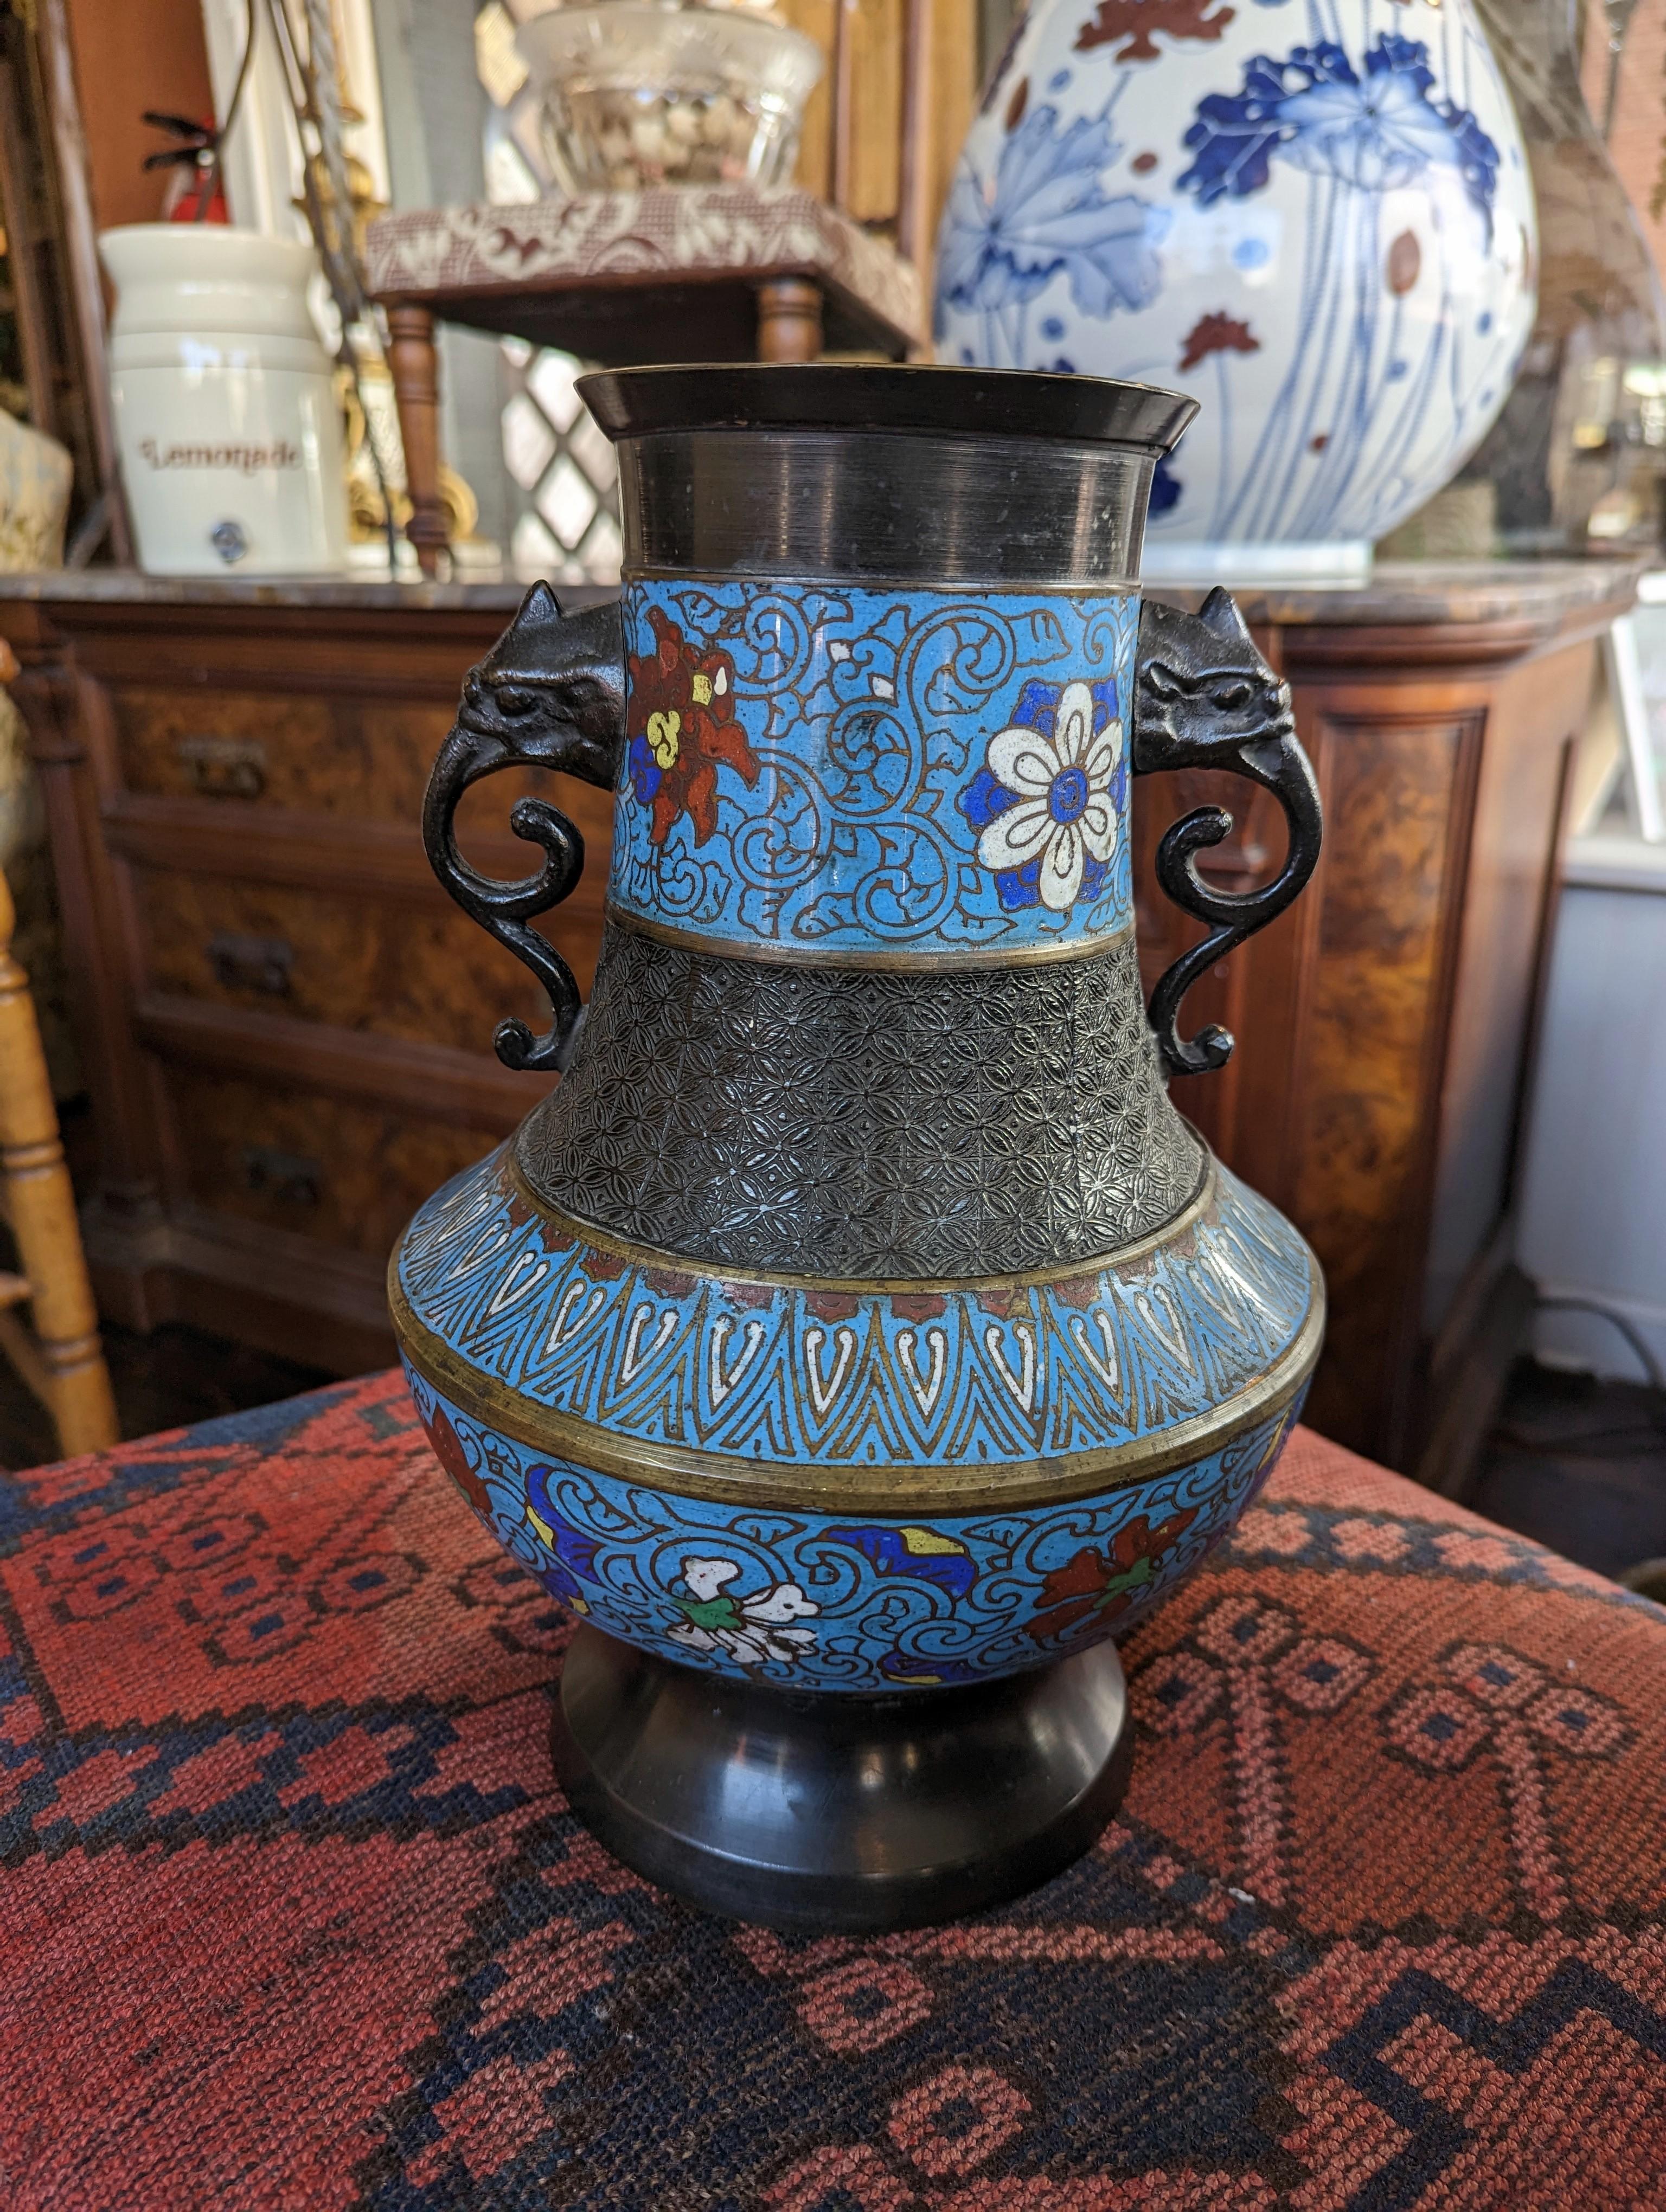 Beautifully crafted vintage Japanese urn shaped vase, featuring elephant head double handles in bronze and enamel. Colorful enamel adorns the vase with floral motifs, created using the champleve technique. Signed / marked 